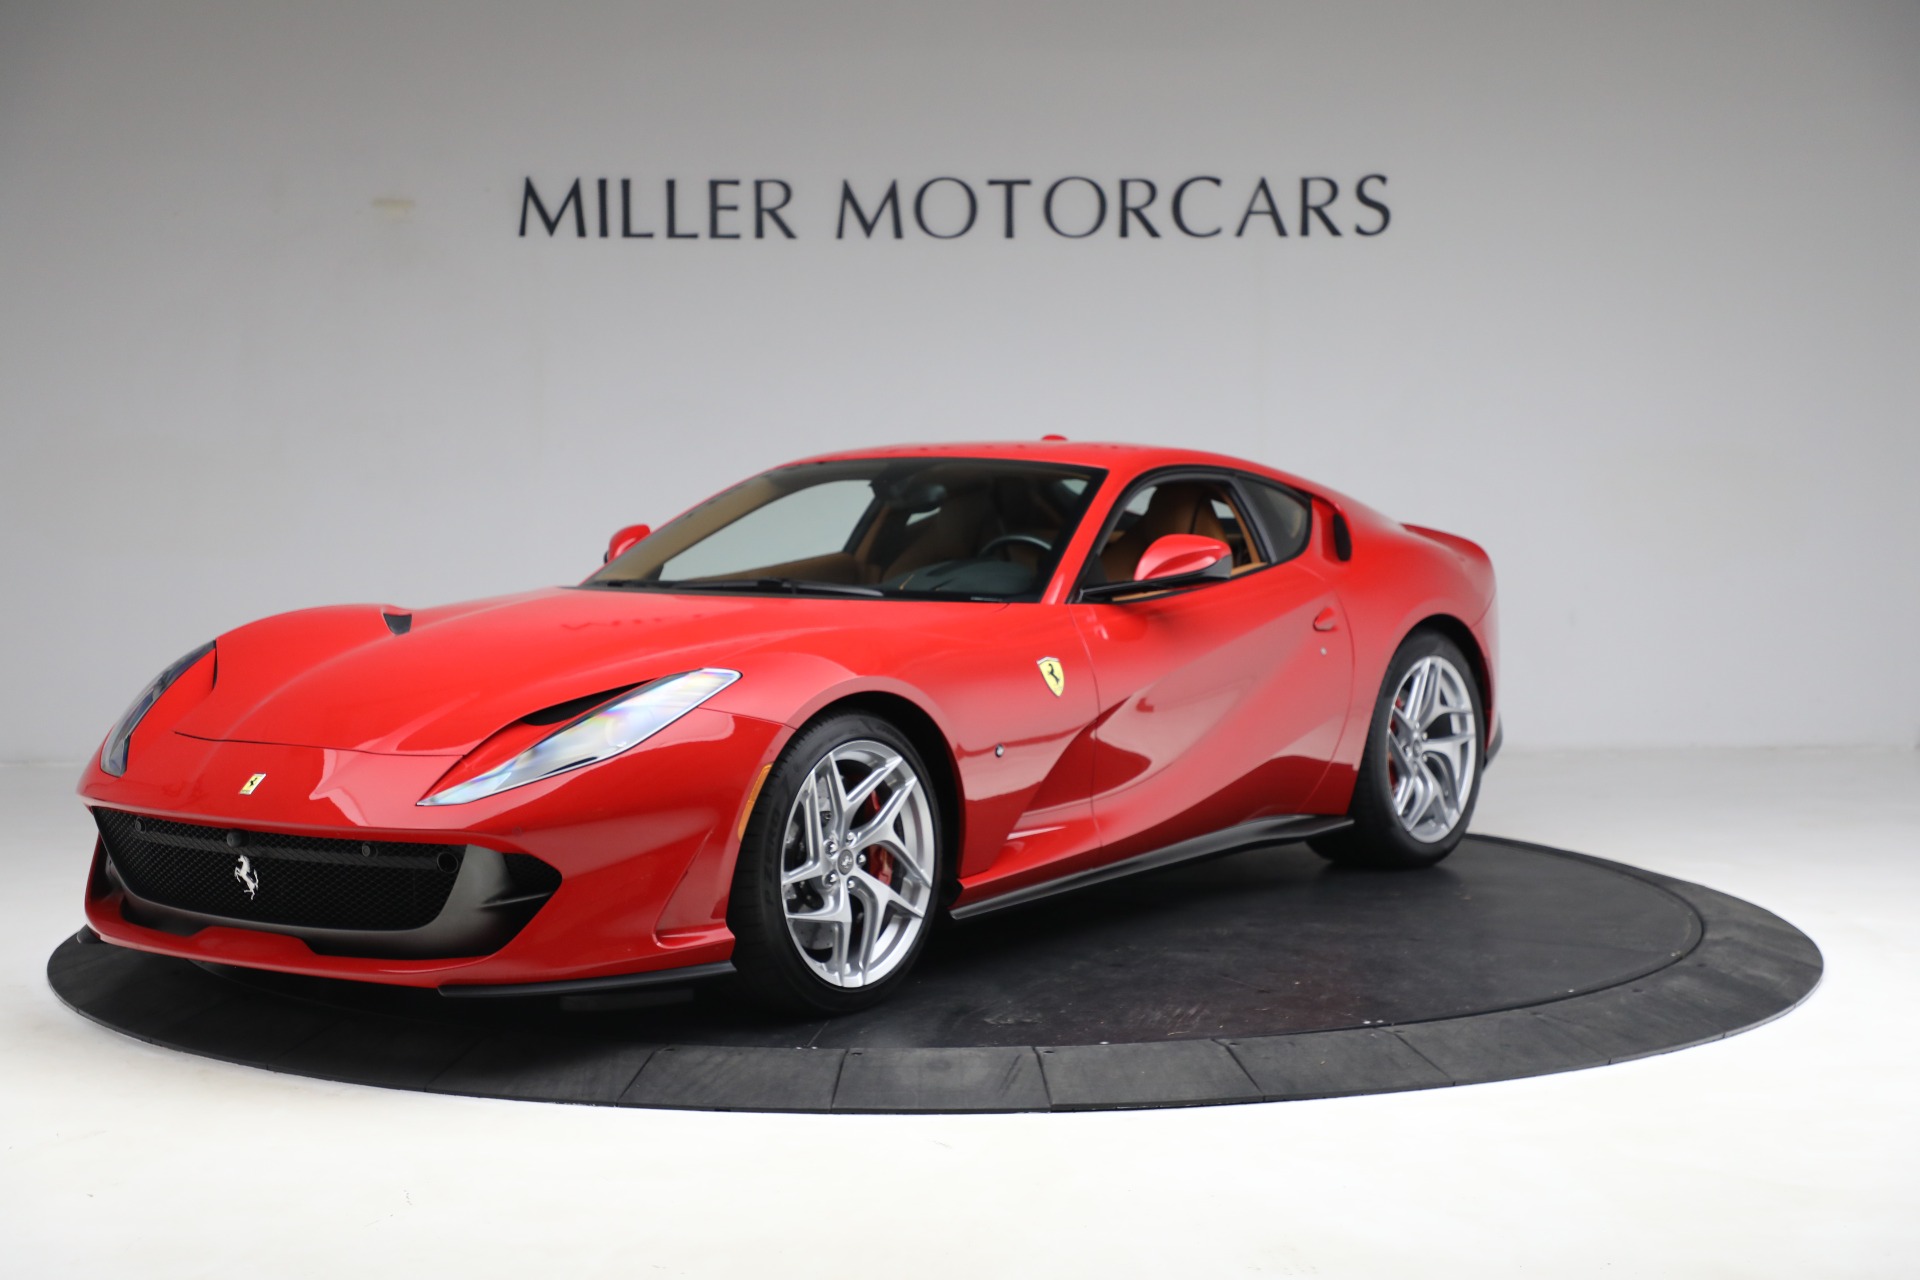 Used 2018 Ferrari 812 Superfast for sale Sold at Bentley Greenwich in Greenwich CT 06830 1